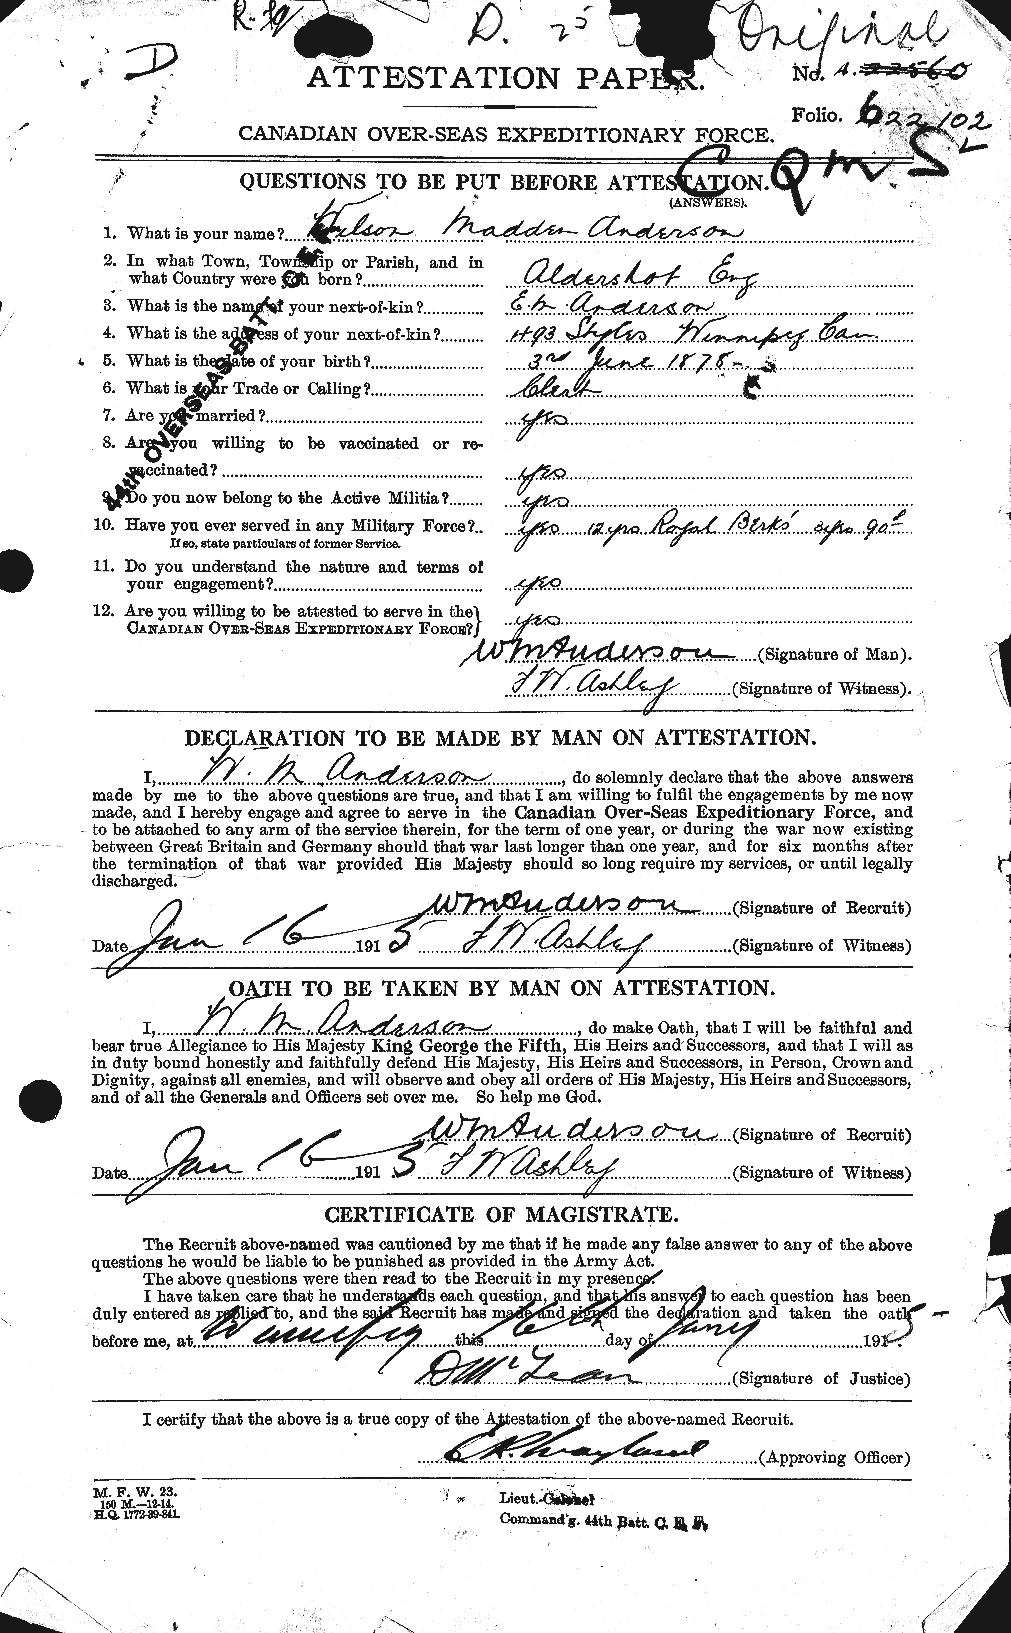 Personnel Records of the First World War - CEF 210663a